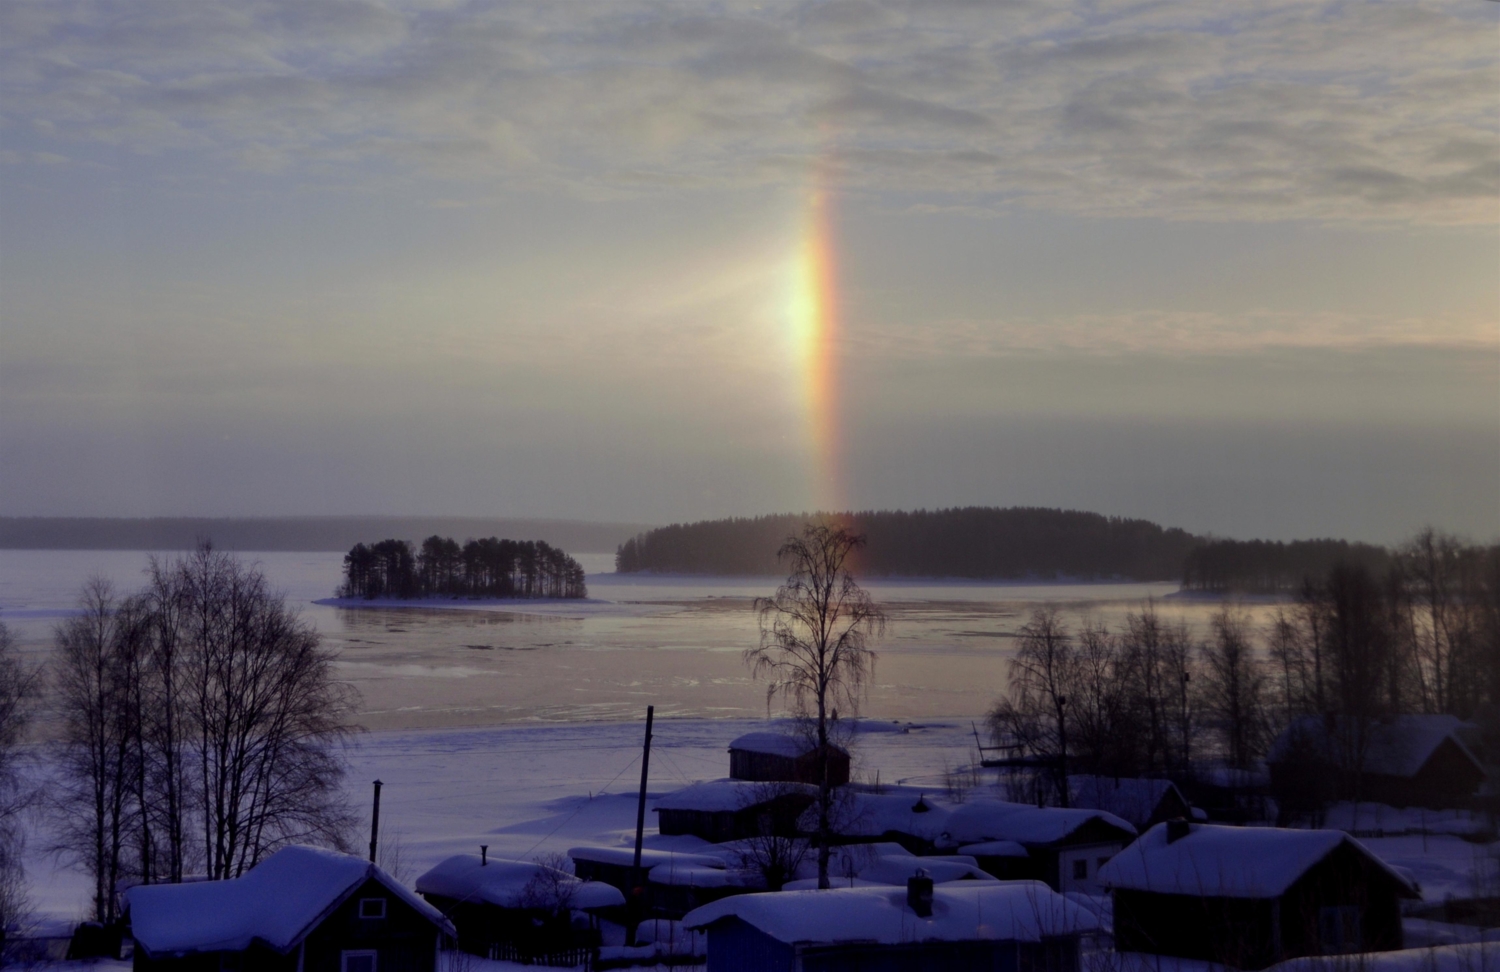 The winter rainbow over the lake